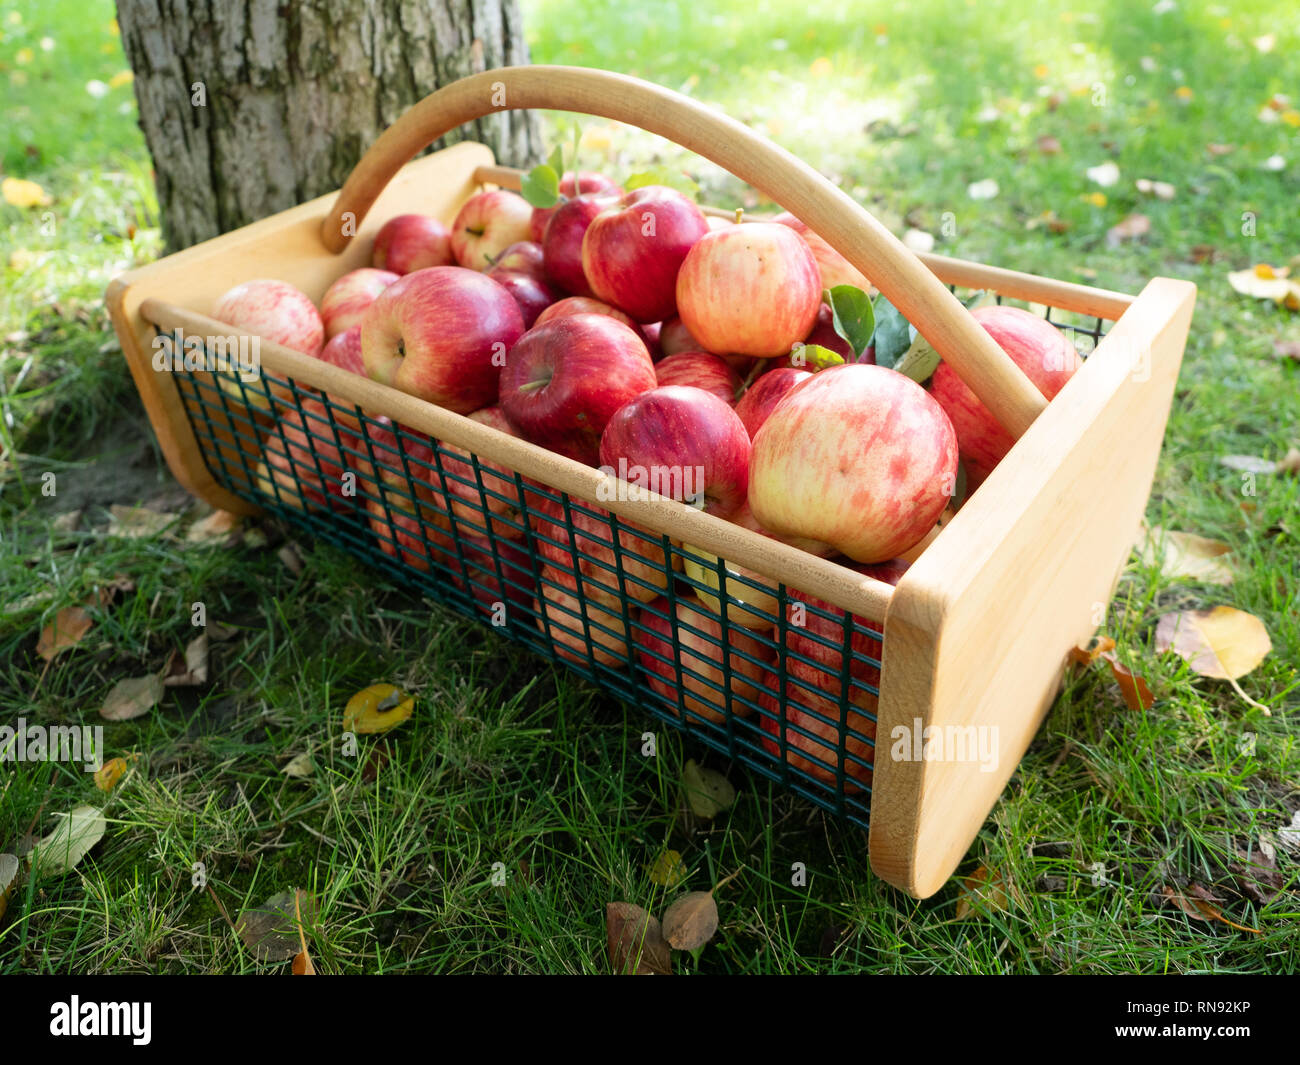 Wire and wood basket with ripe apples on grass with fallen leaves. Low angle view. Stock Photo